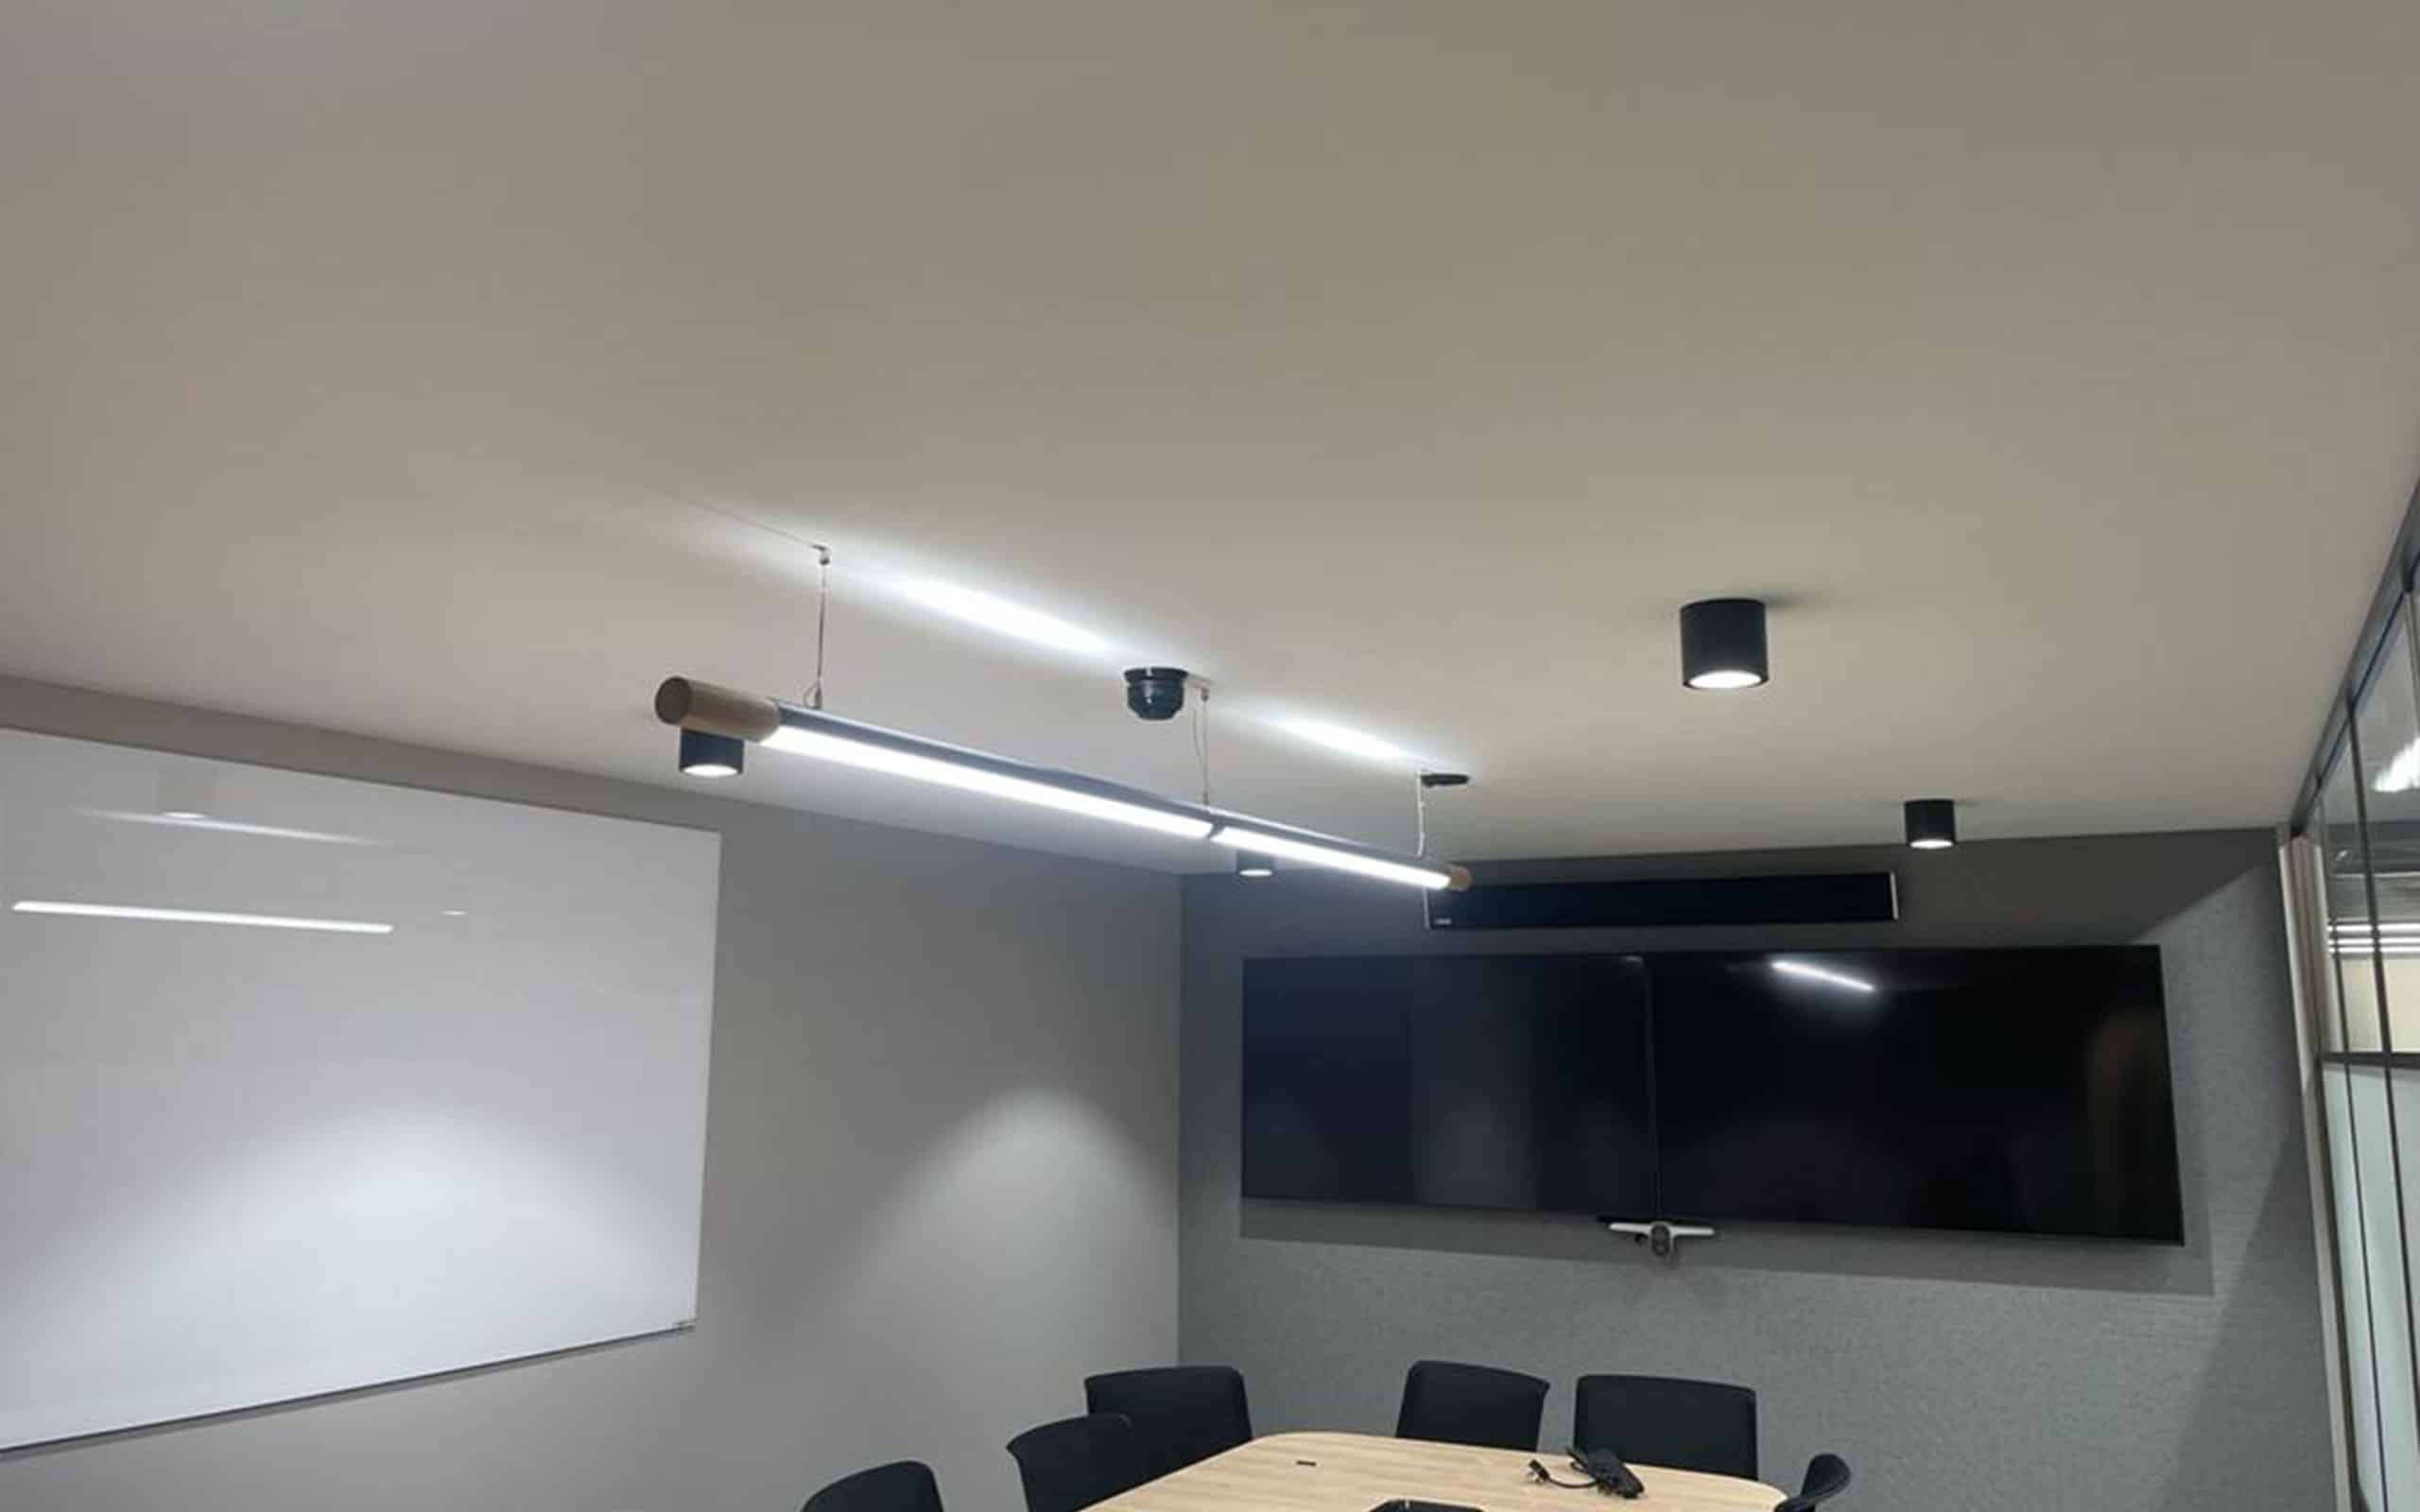 Surface mounted Force Down Lights Featured in Meeting Room of Luxury Office Space. Photo by Habit Action